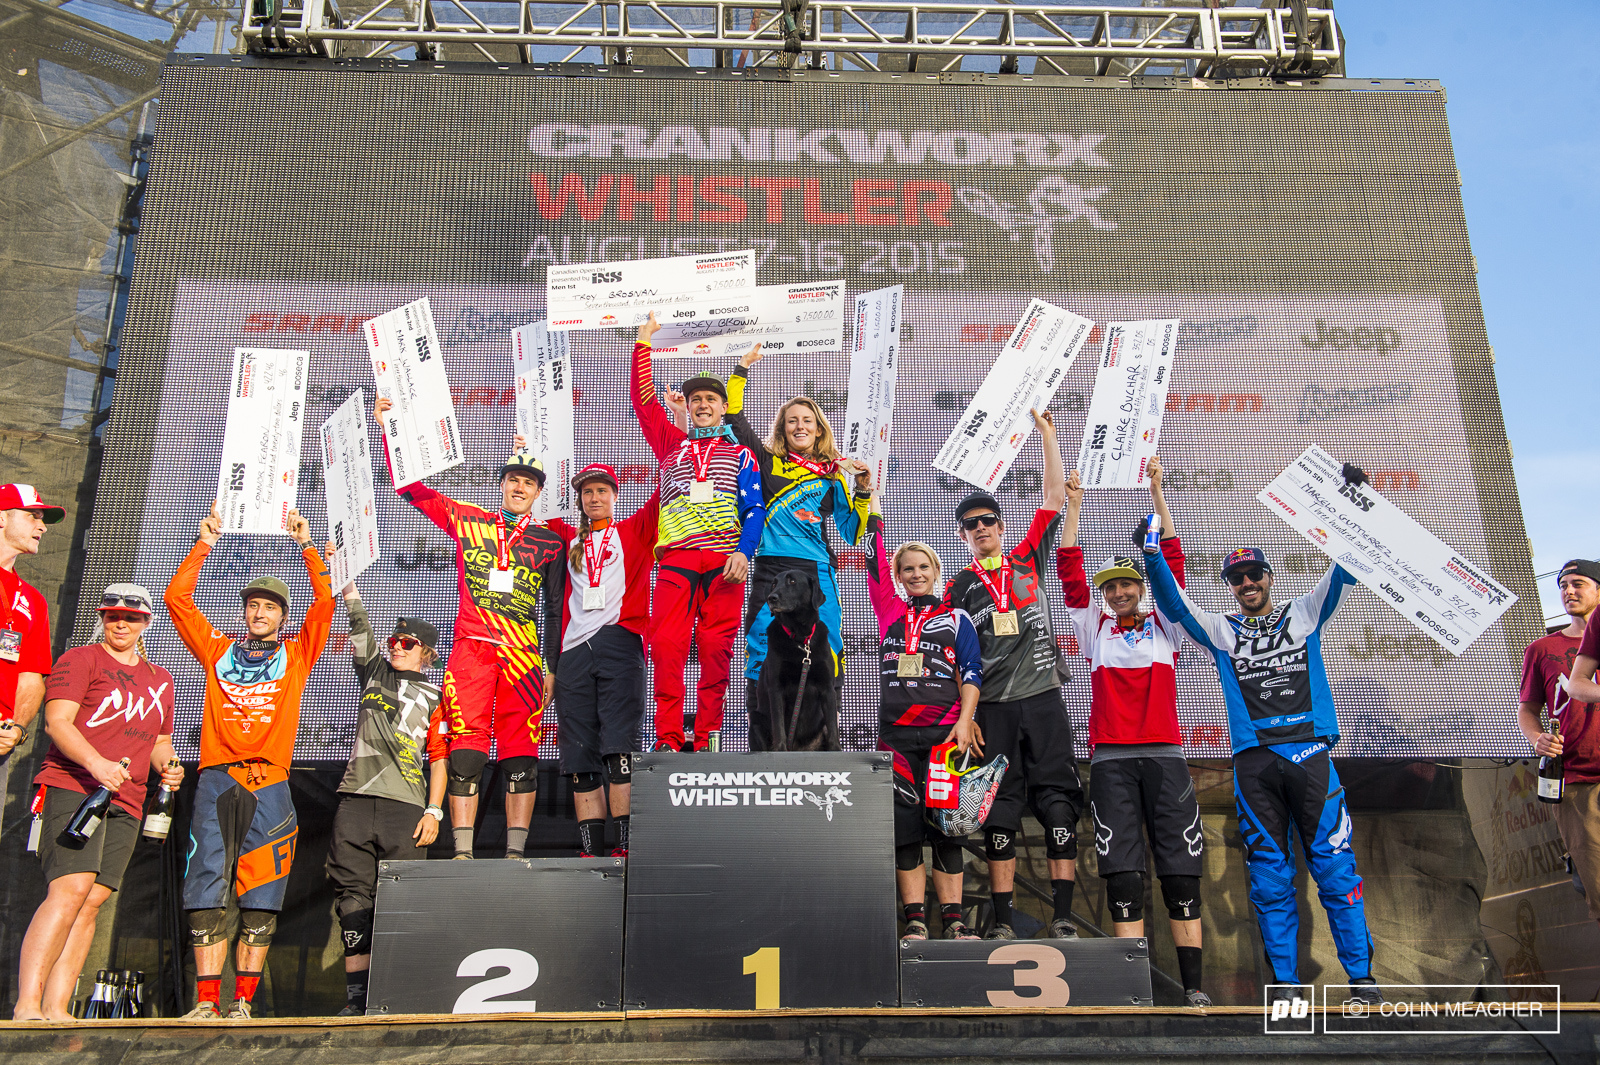 Canadian Open DH Podium (L-R). Connor Fearon and Emilie Siegenthaler (4), Mark Wallace and Miranda MIller (2), Troy Brosnan and Casey Brown (1), Tracy Hannah and Sam Blenkinsop (3), Claire Buchar and Marcelo Gutierrez (5).